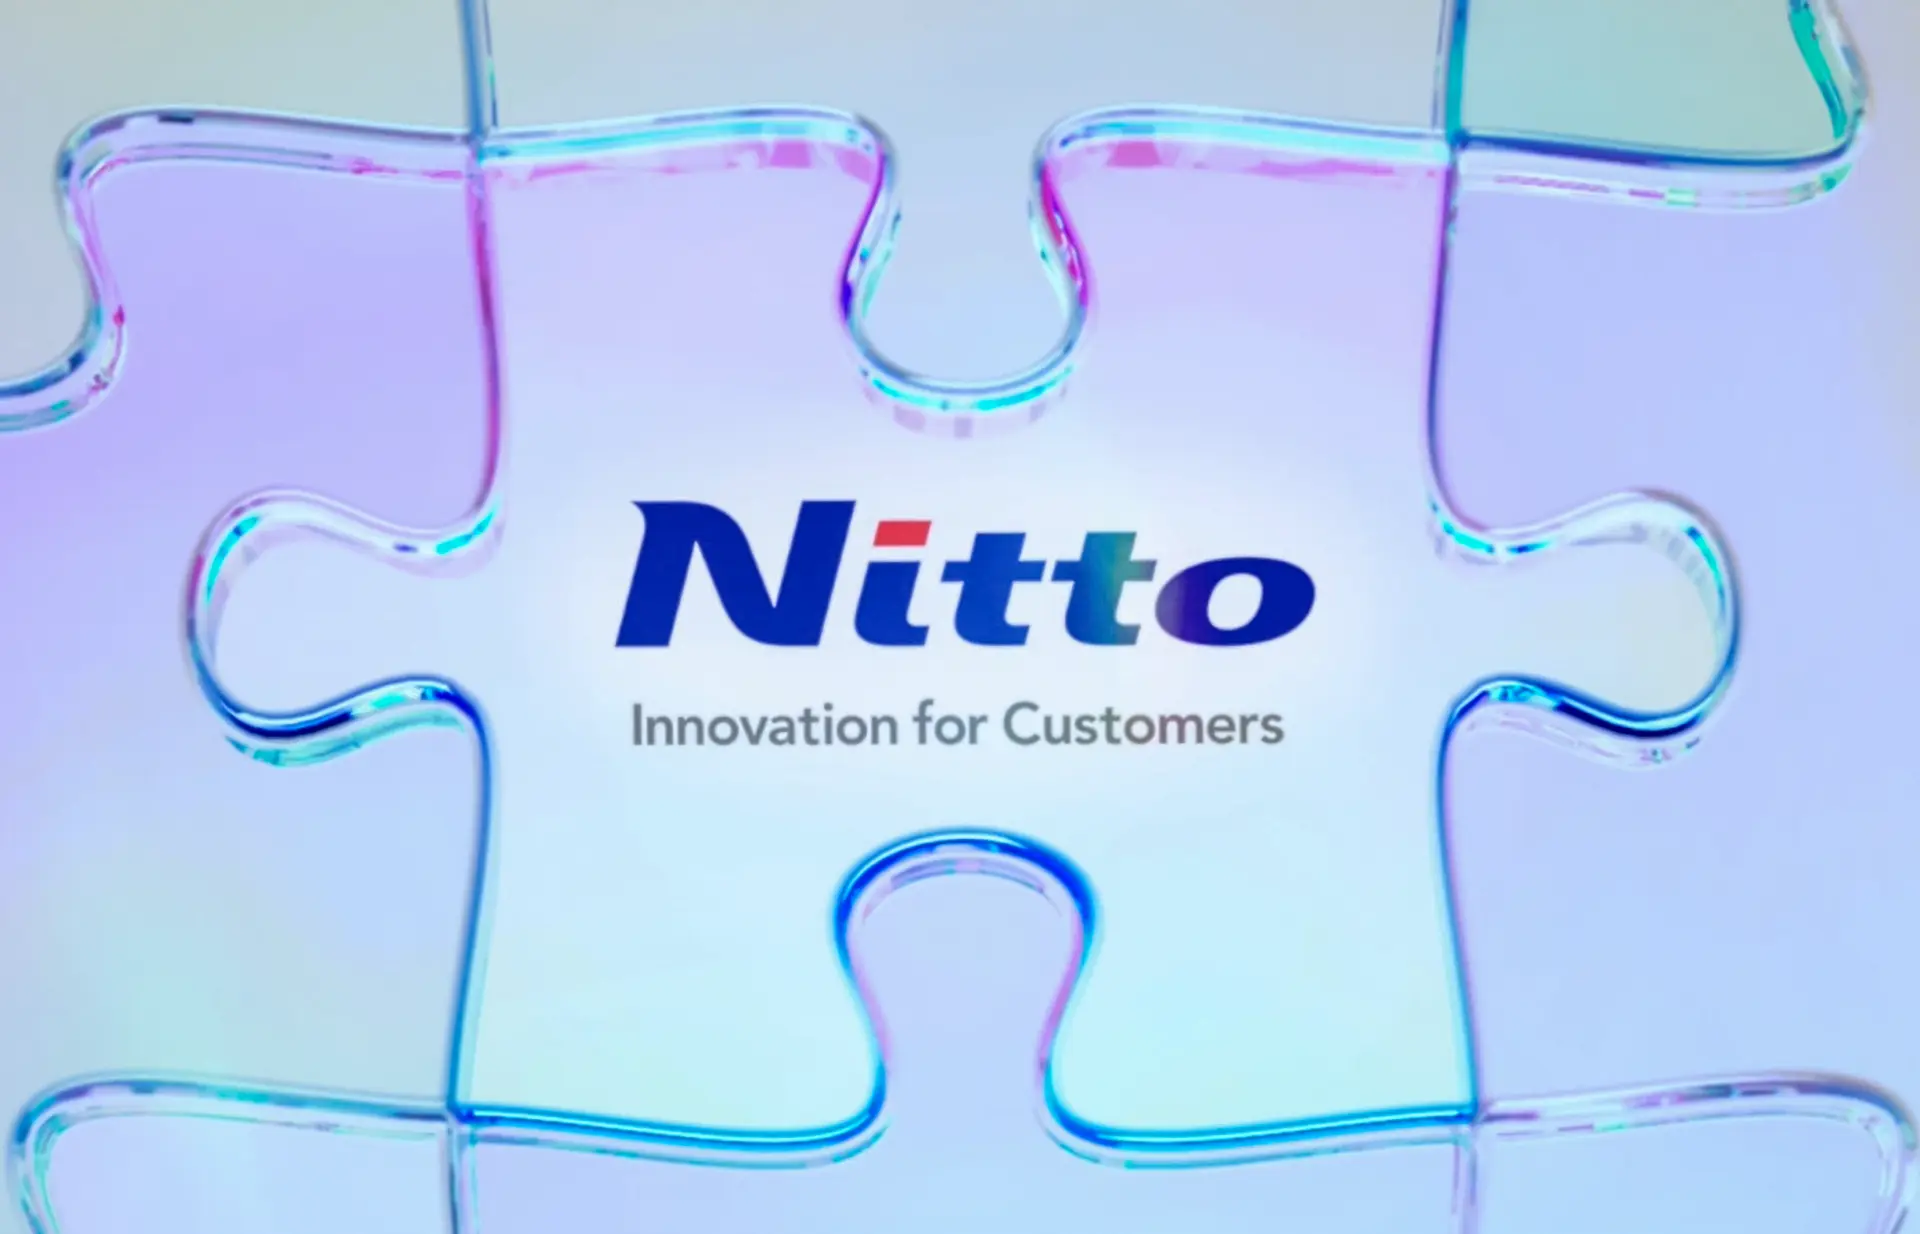 Mid-Term Management Plan "Nitto for Everyone 2025"